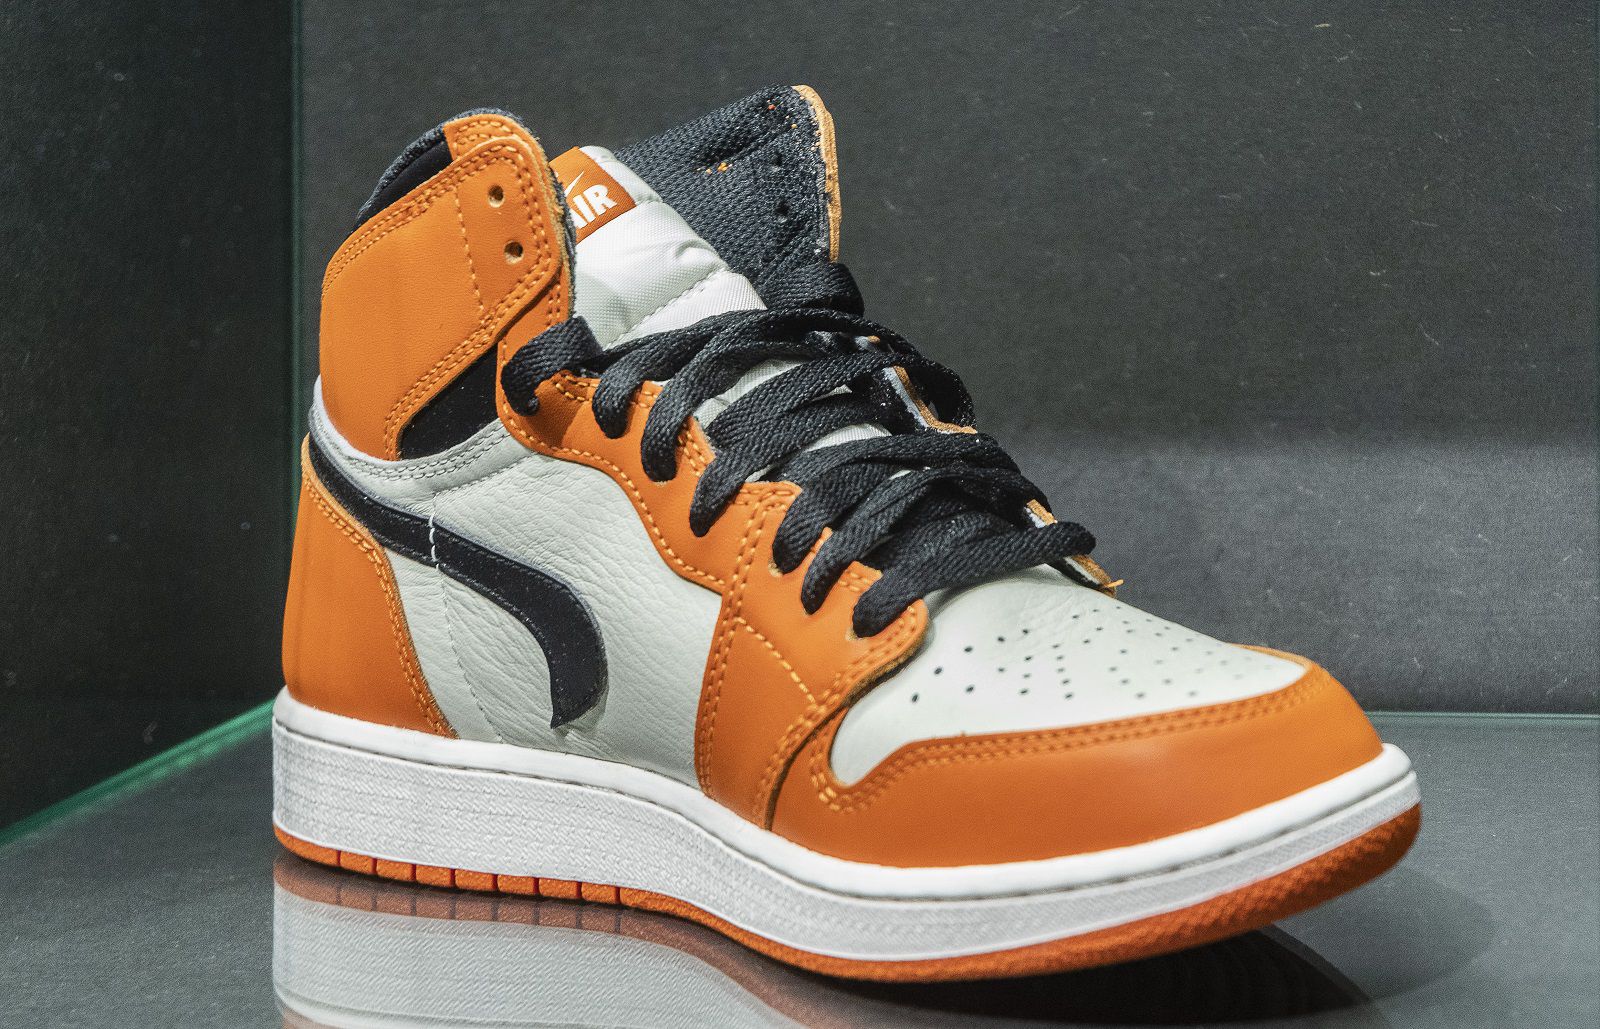 These Jordan 1s With 'Factory Defects' Are Being Resold For More Than RM600,000